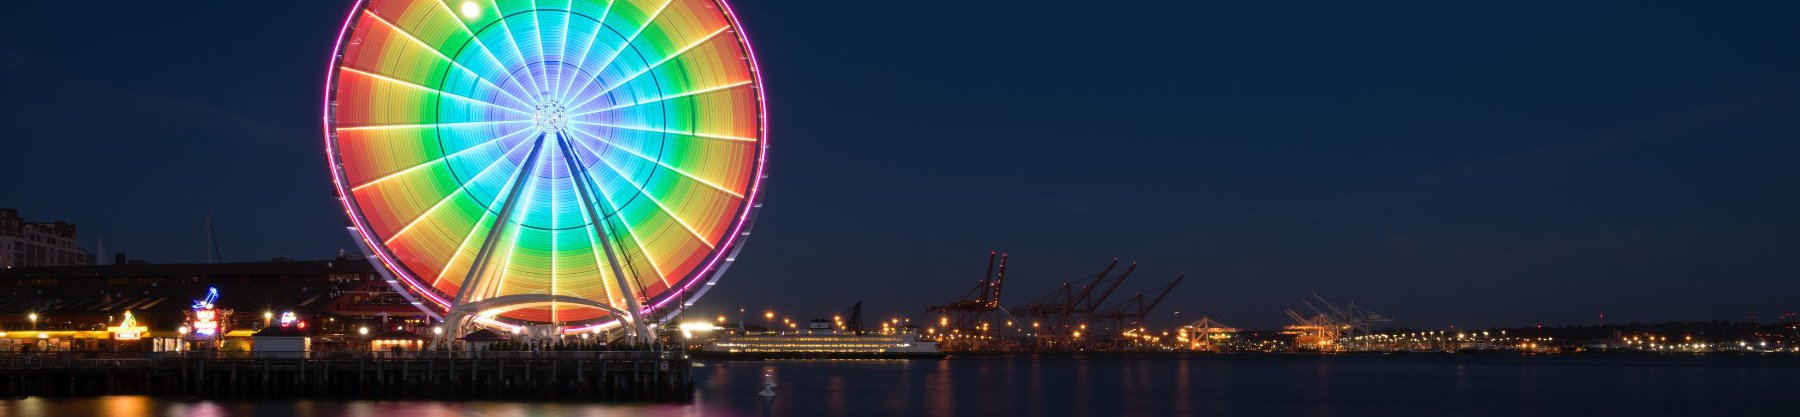 The Ferris wheel in Seattle lit up in rainbow colors for Seattle Pride month celebrations